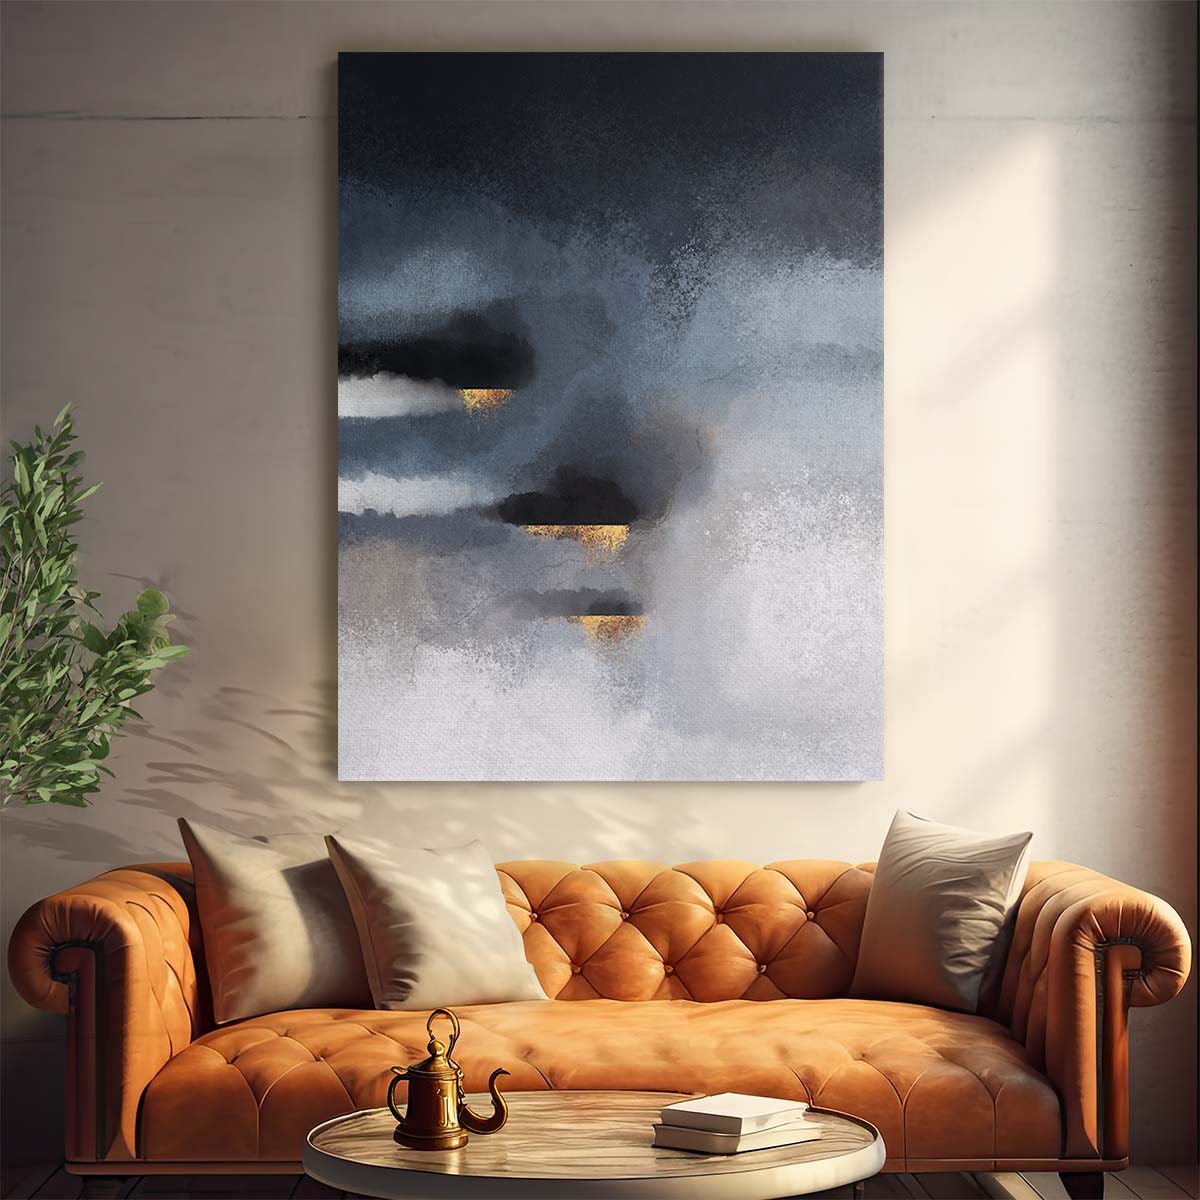 Abstract Golden Cloudy Sky Illustration in Black, White, and Gold by Luxuriance Designs, made in USA